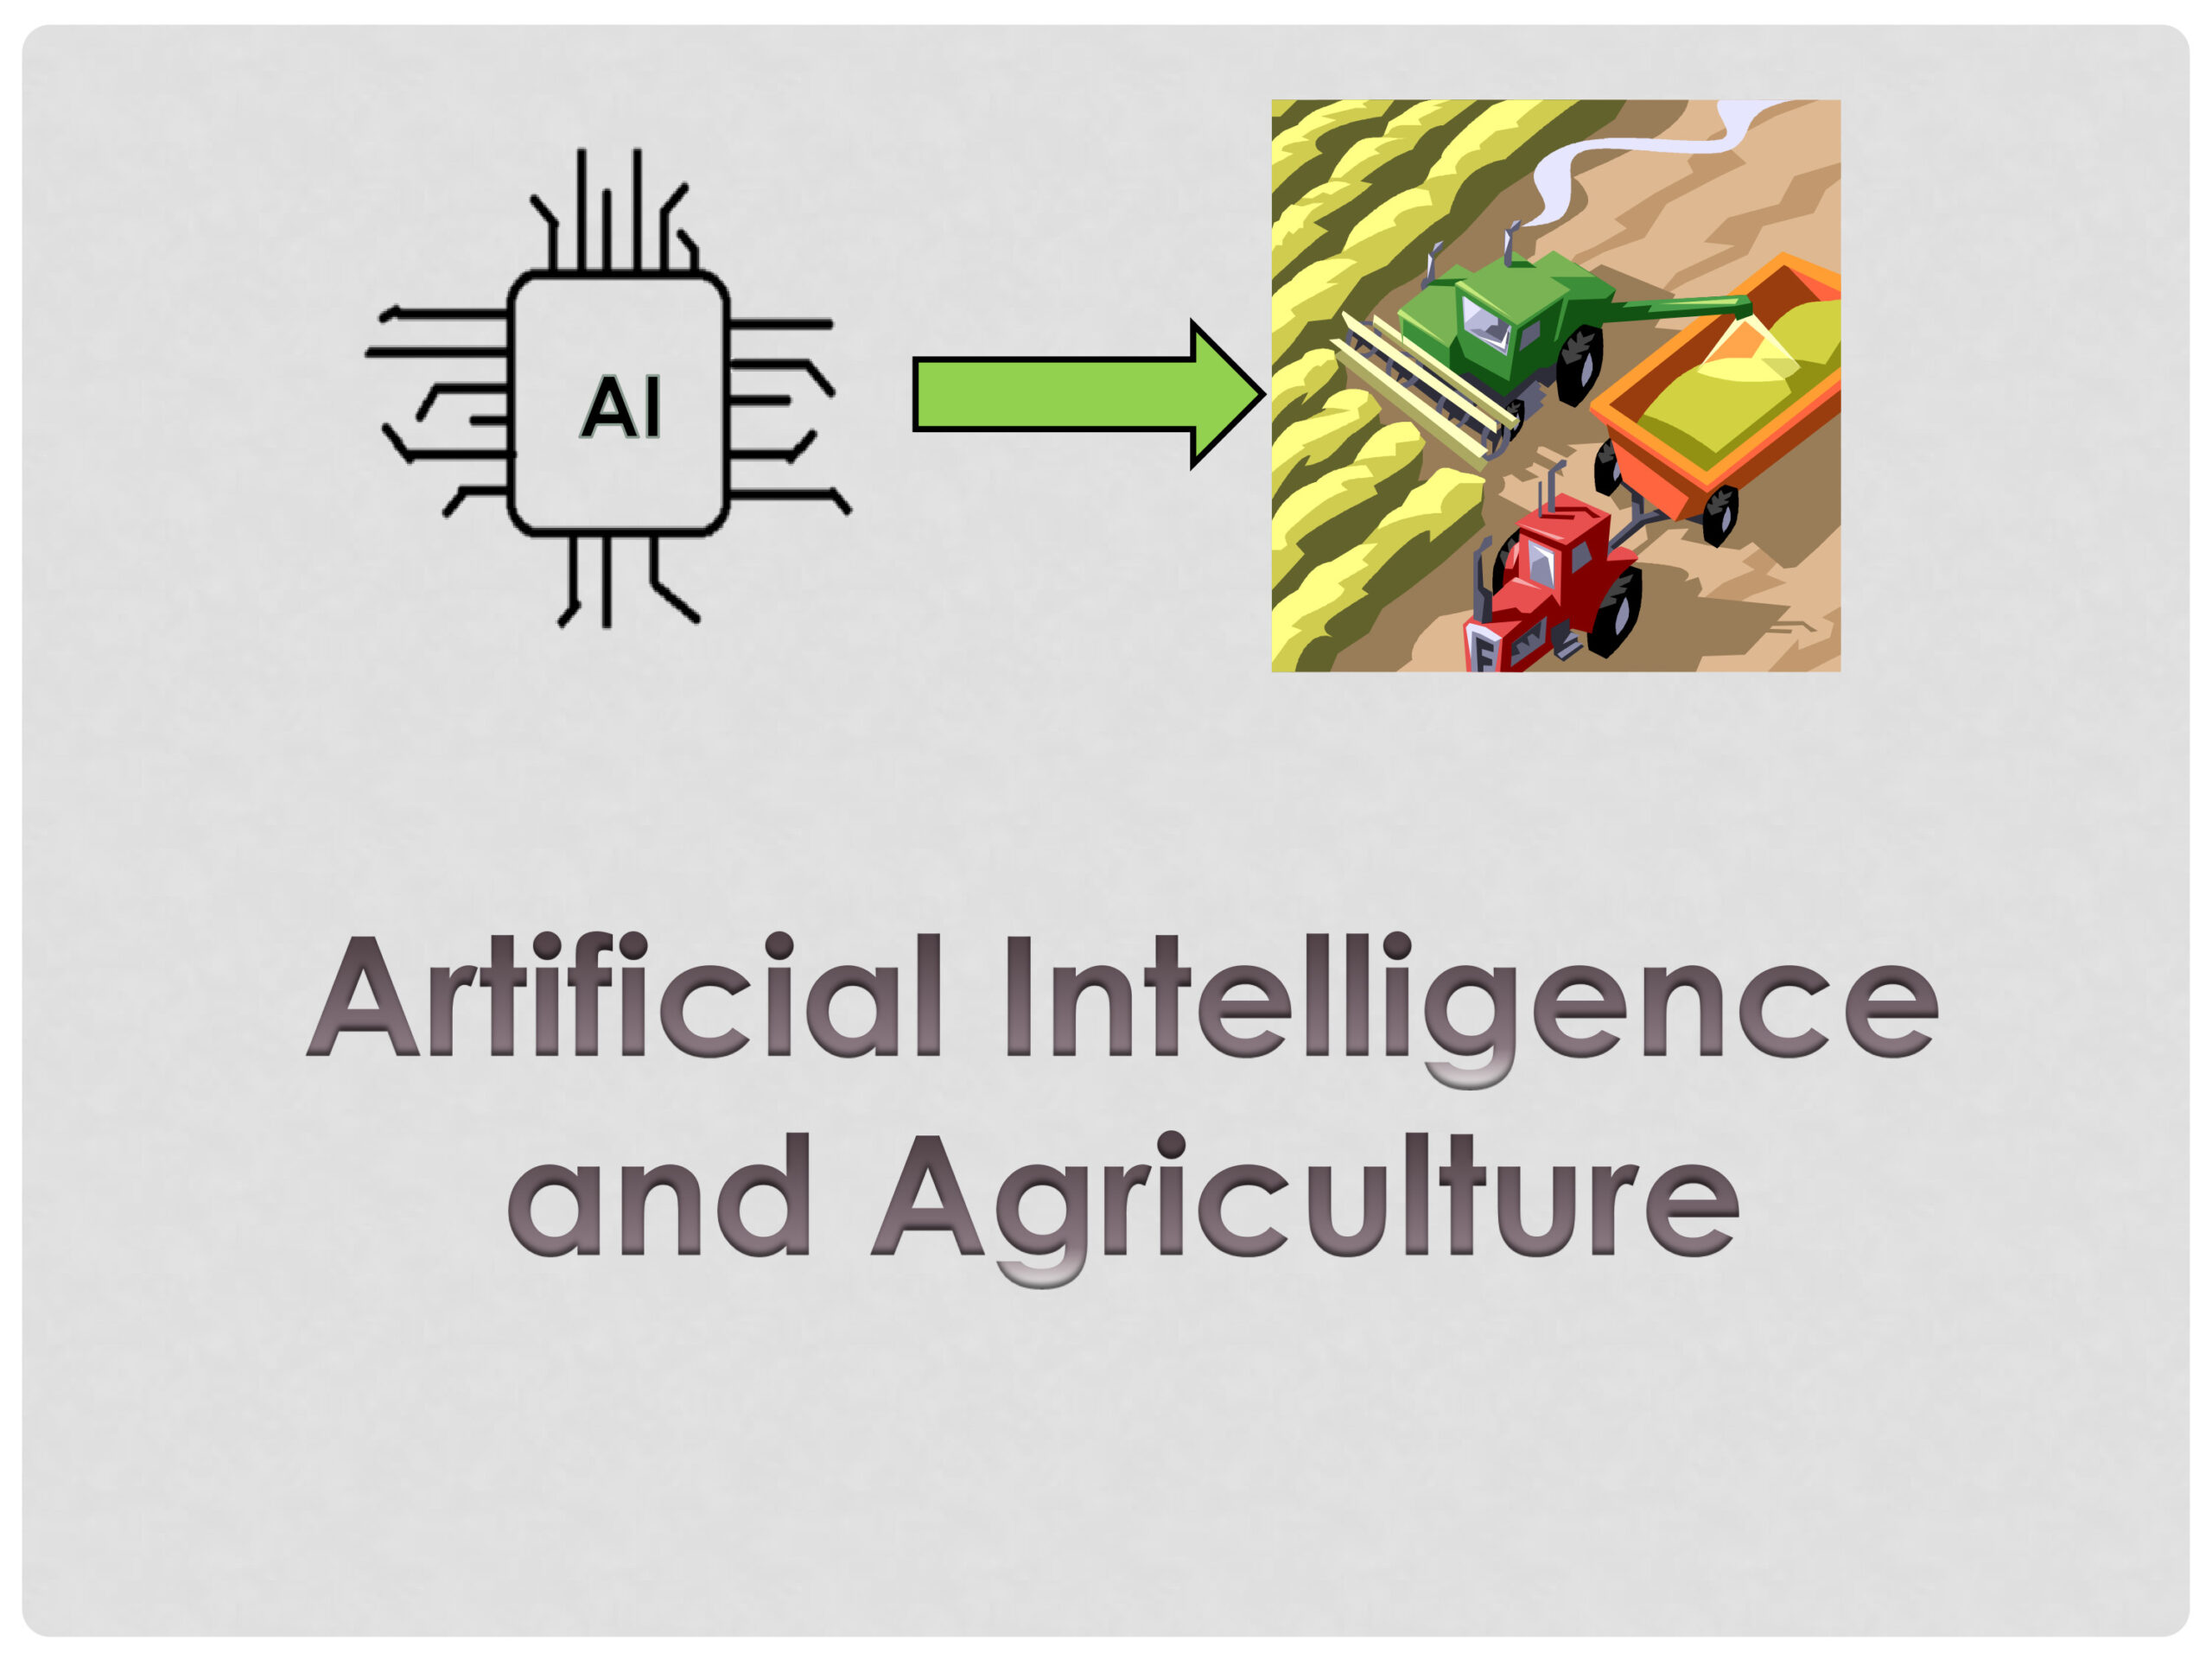 Artificial Intelligence in agriculture